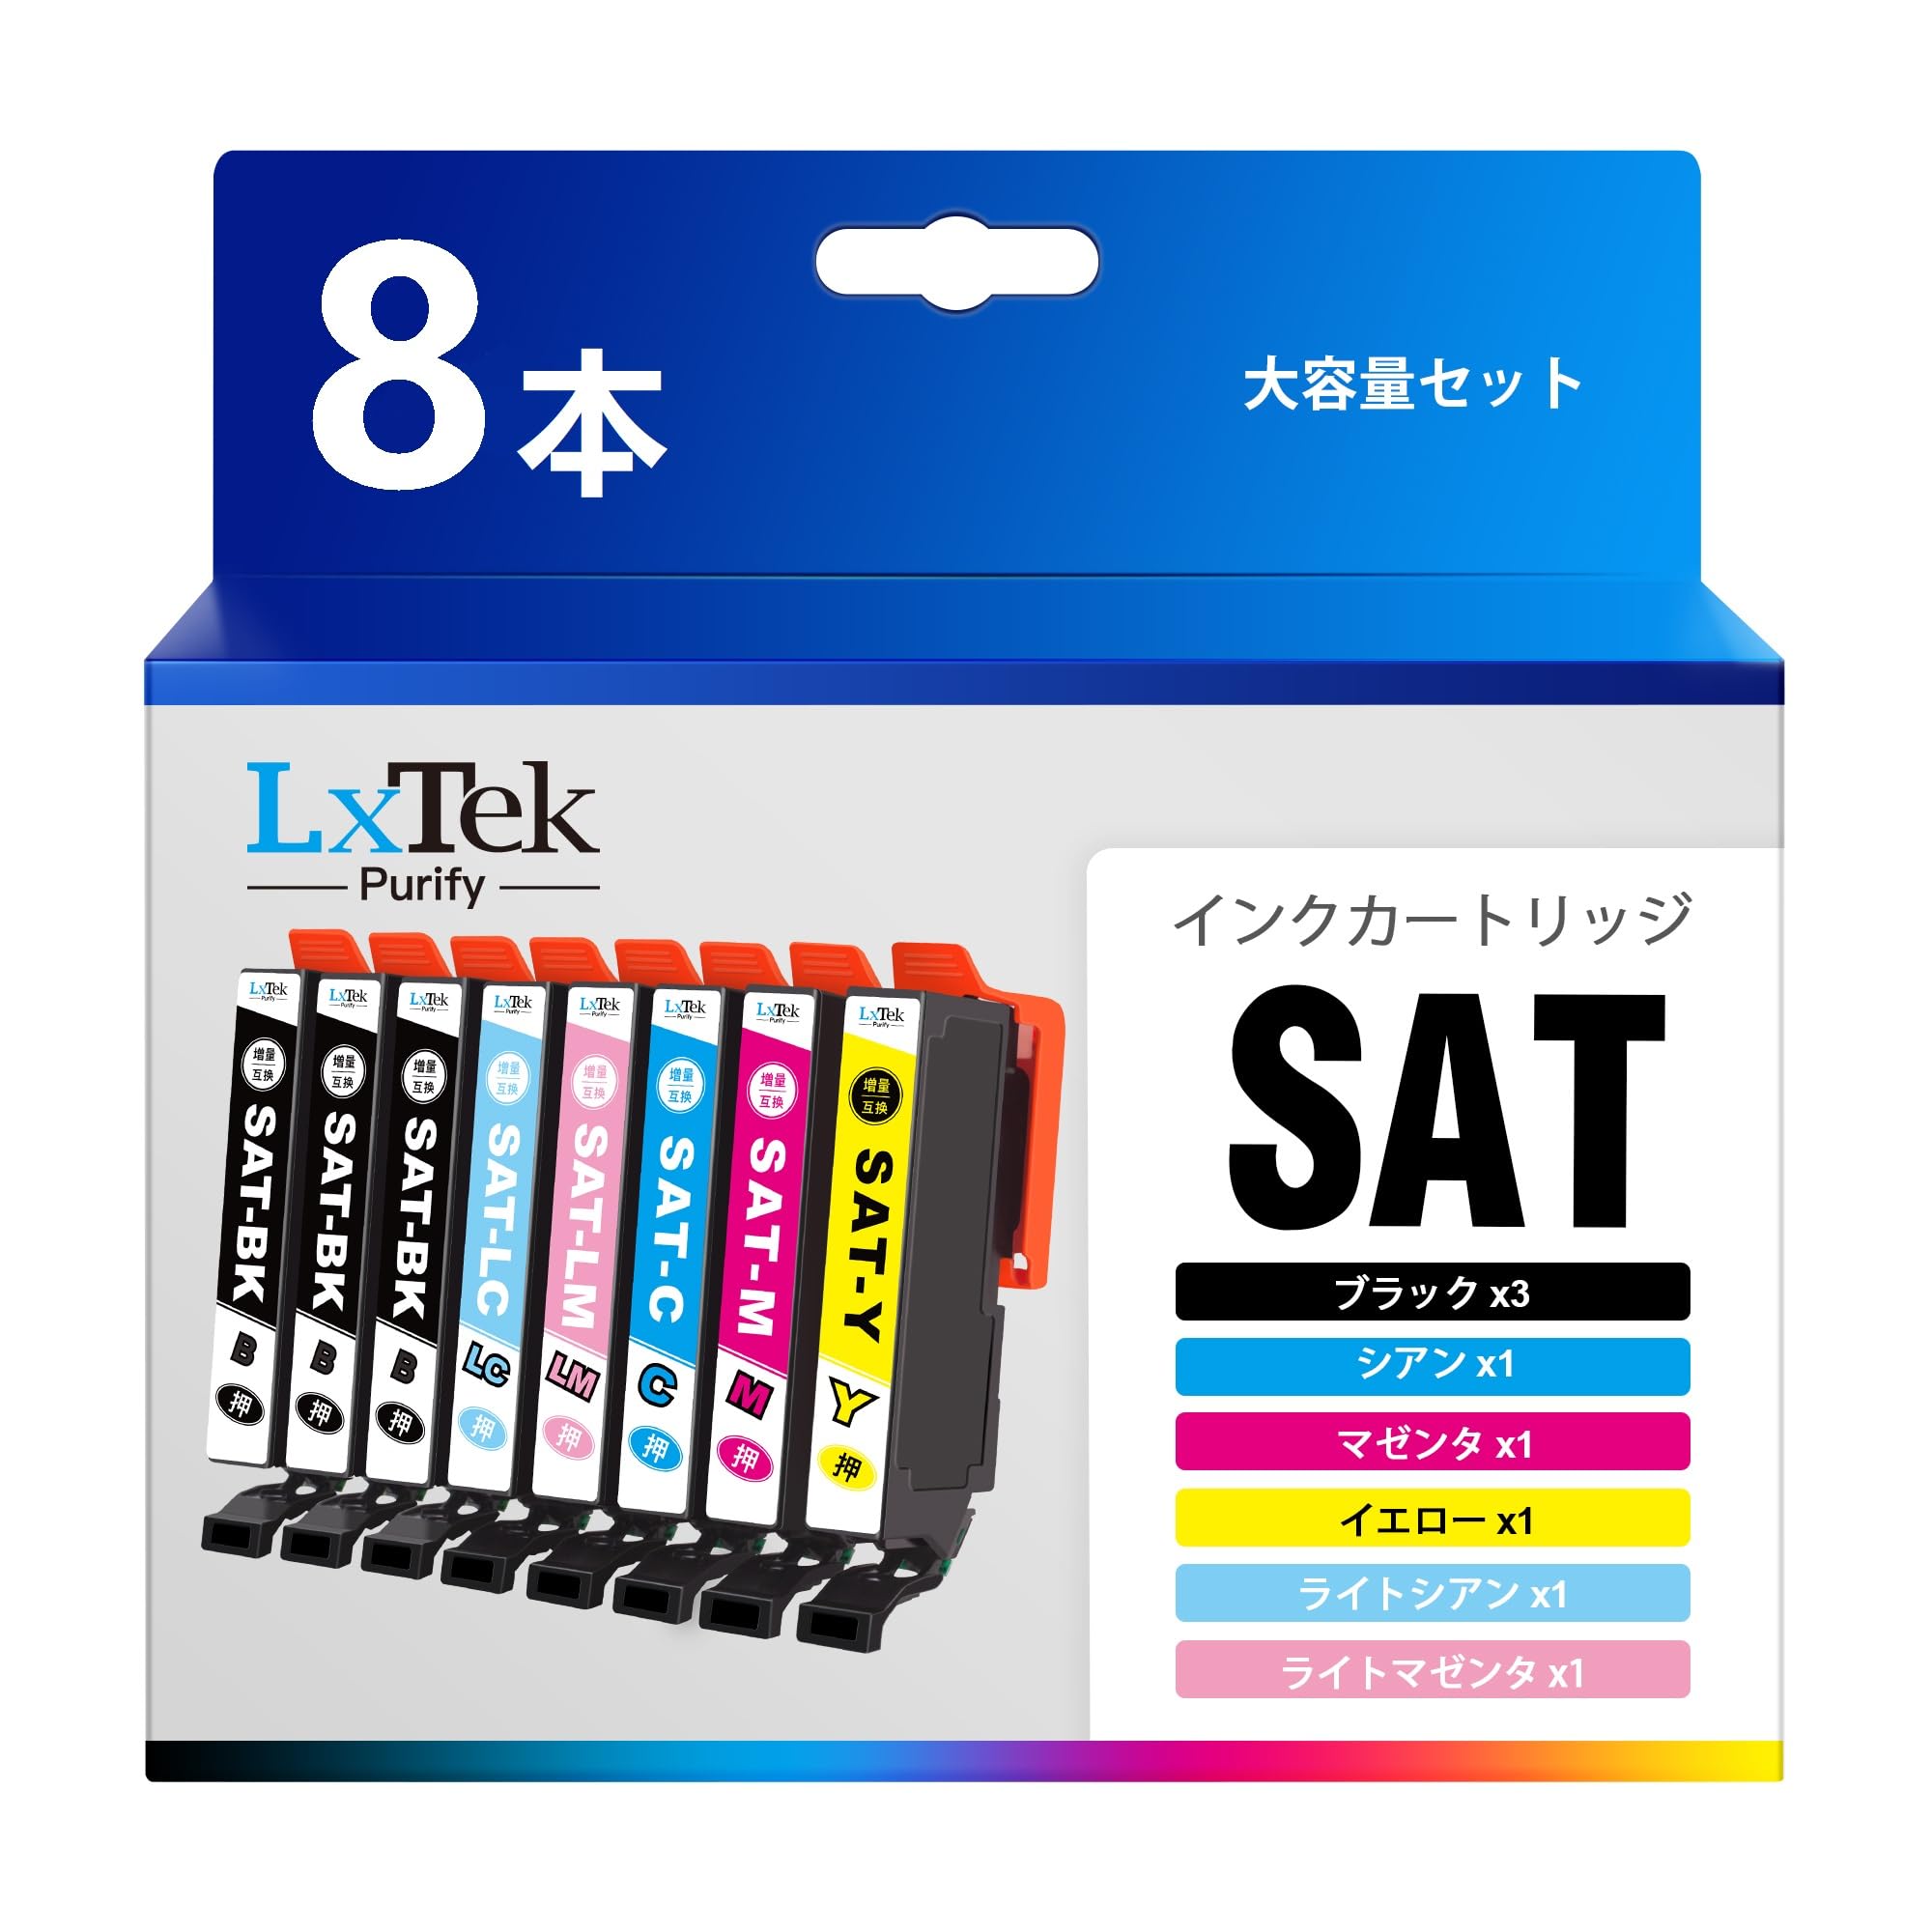 LxTek Purify エプソン 用 インク サツマイモ sat-6cl 8本 epson 用 サツマイモ 純正と併用可能 さつまいも 薩摩芋 ep-715a ep-714a ep-814a ep-815a 互換インク 【2種類の包装任意発送】